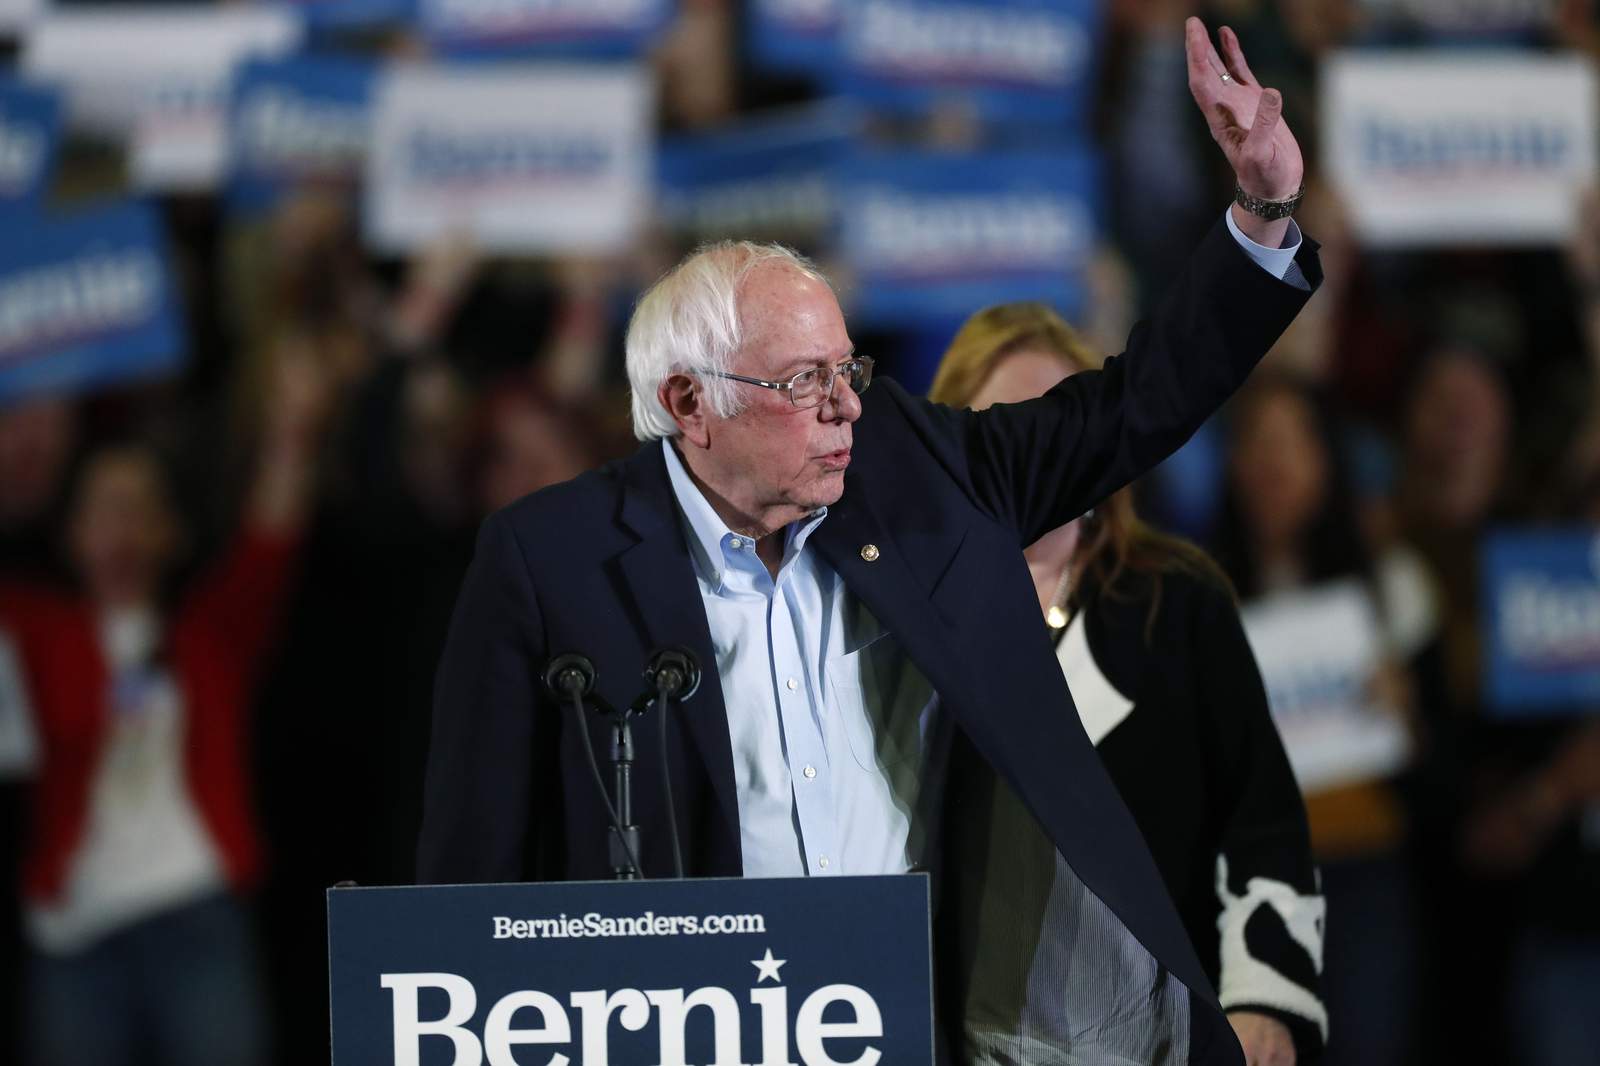 Bernie Sanders to hold campaign rally in San Antonio